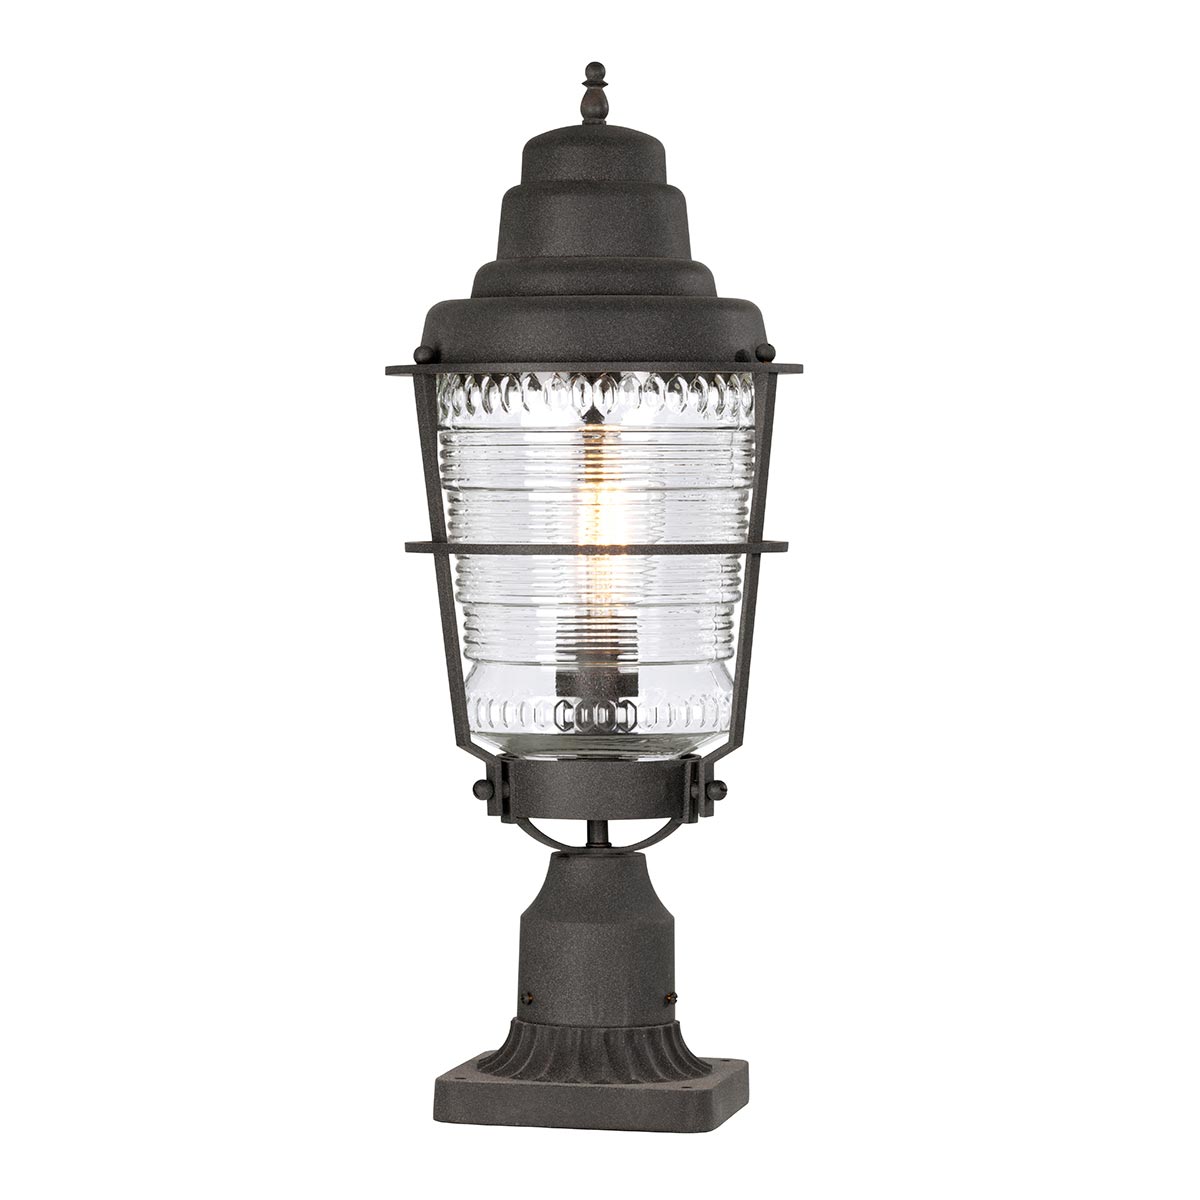 Chance Harbor Outdoor Pedestal Lantern Weathered Zinc Ribbed Glass